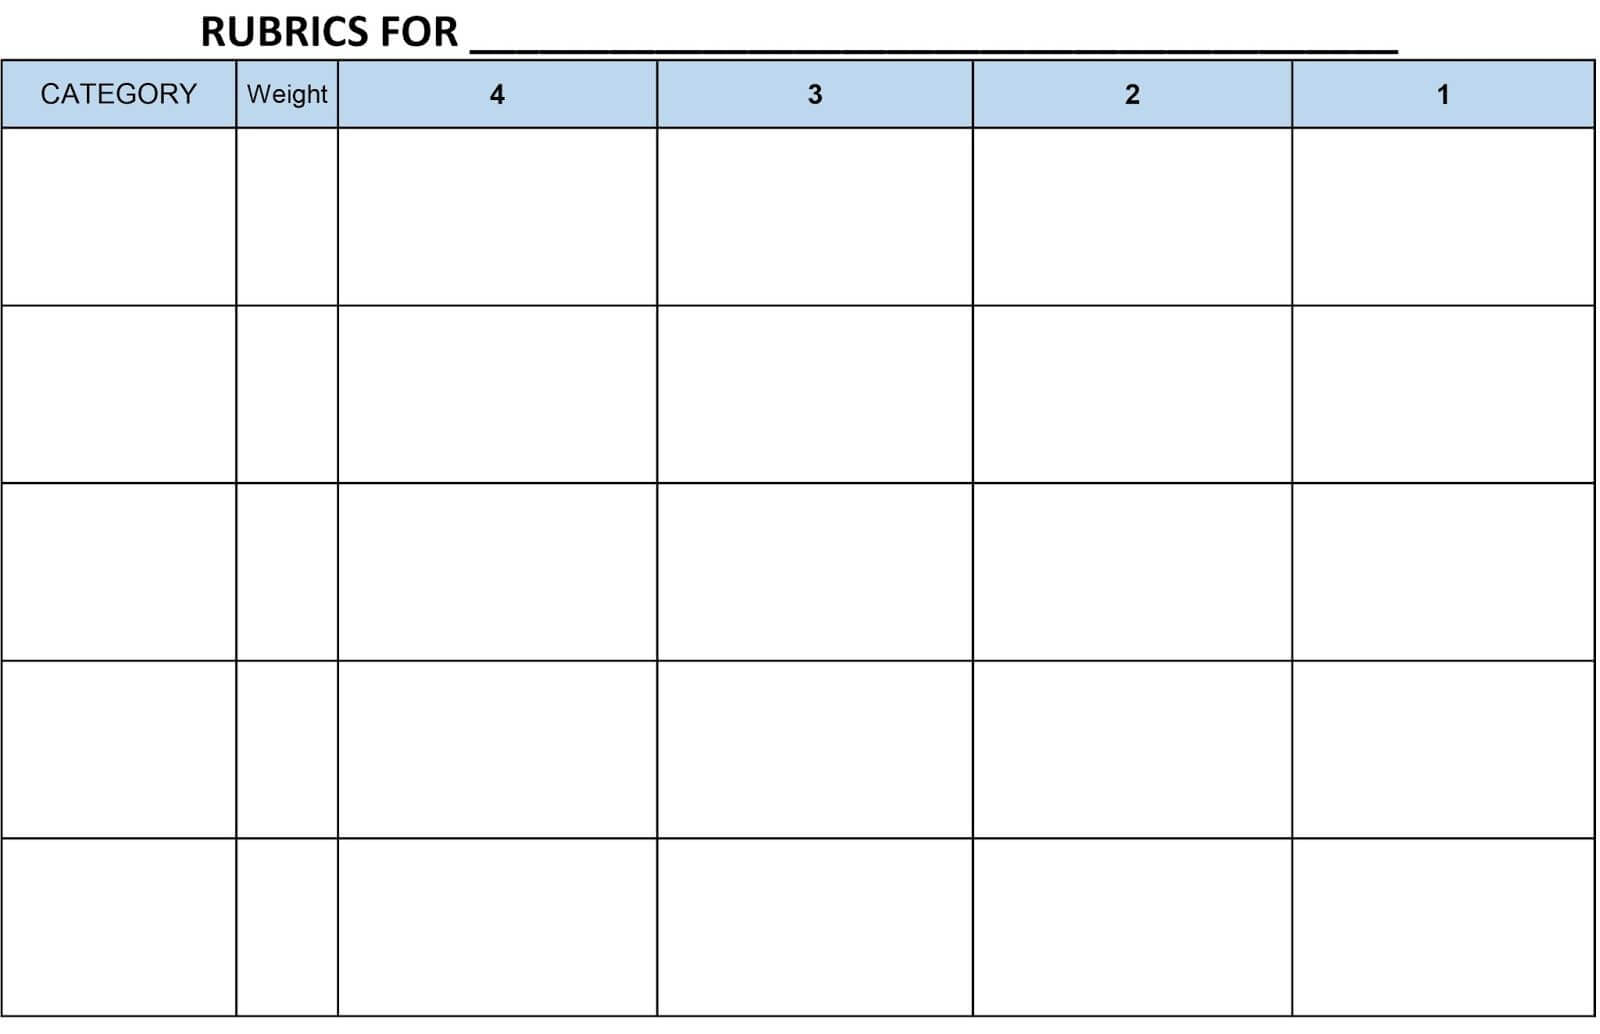 Image Result For Blank Rubric Template Editable | Rubrics Throughout Blank Rubric Template